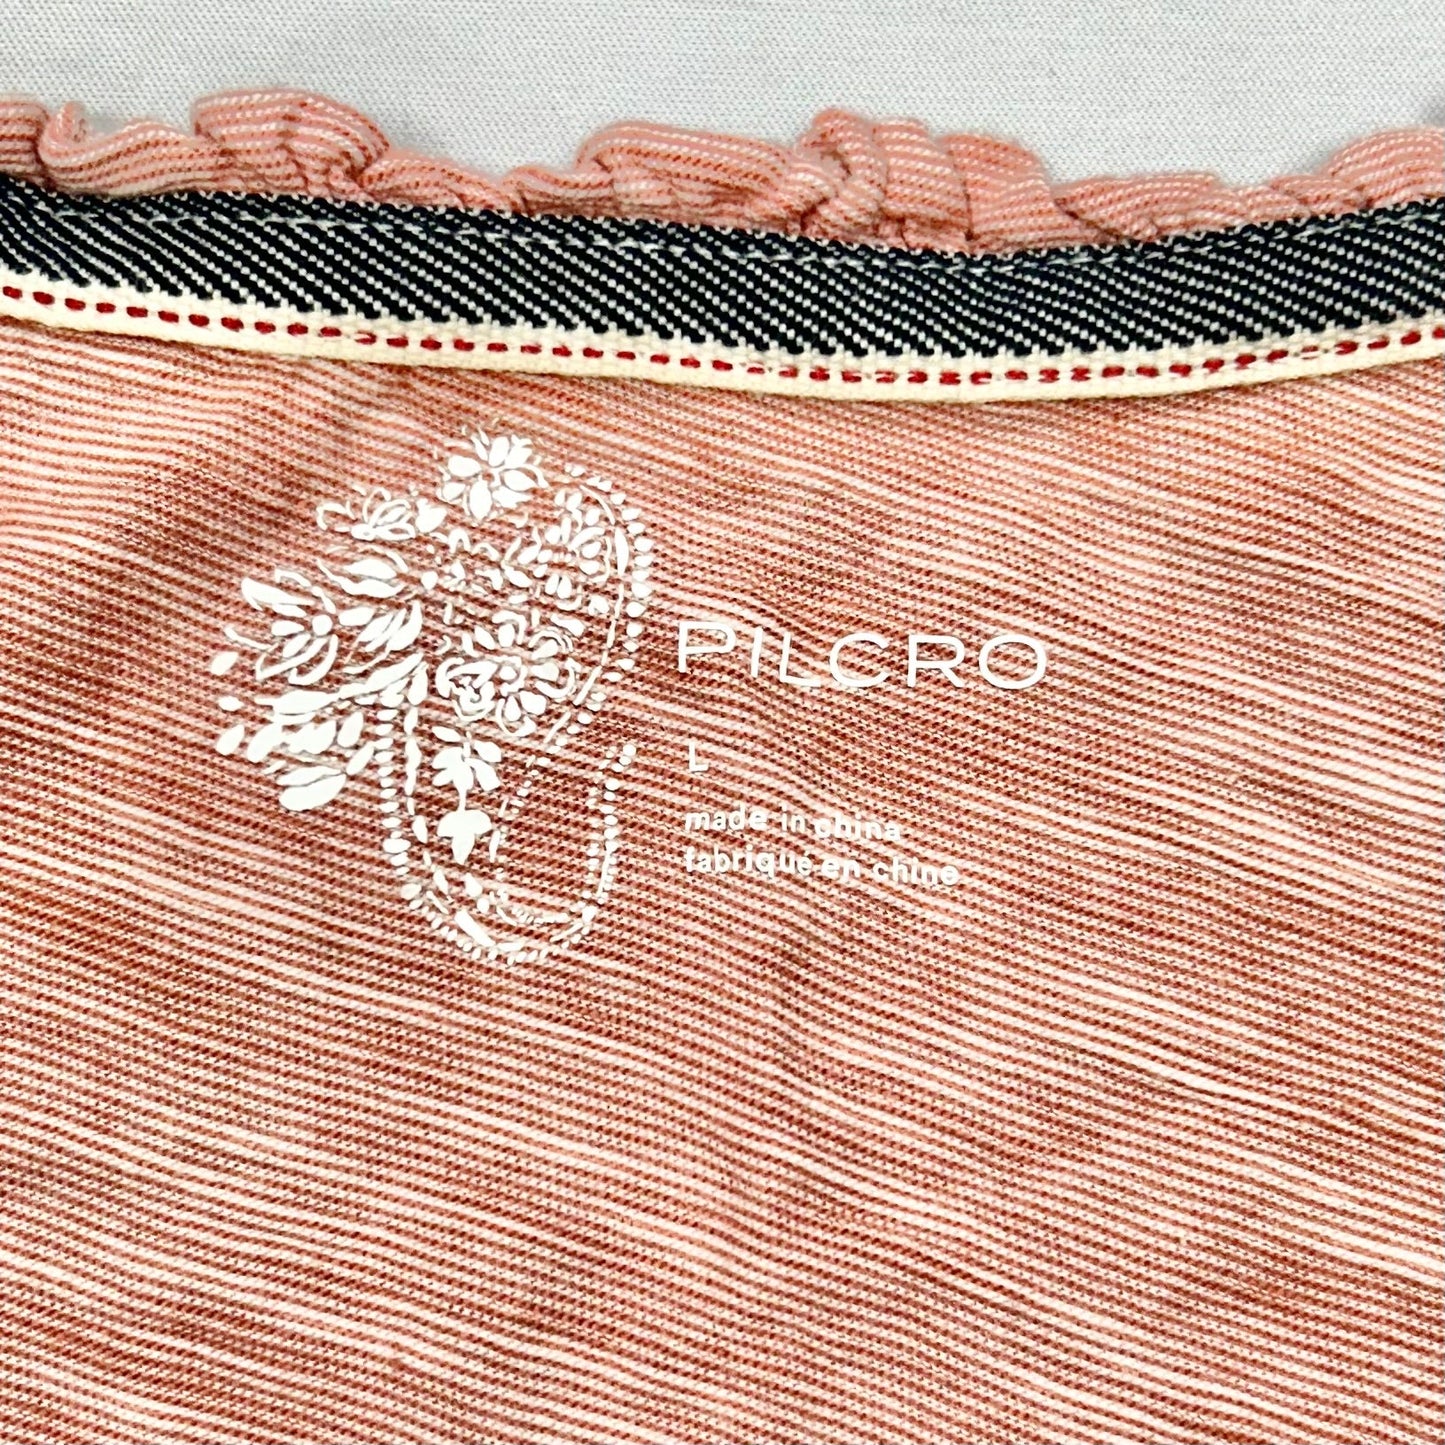 Pink & White Top Sleeveless By Pilcro, Size: L